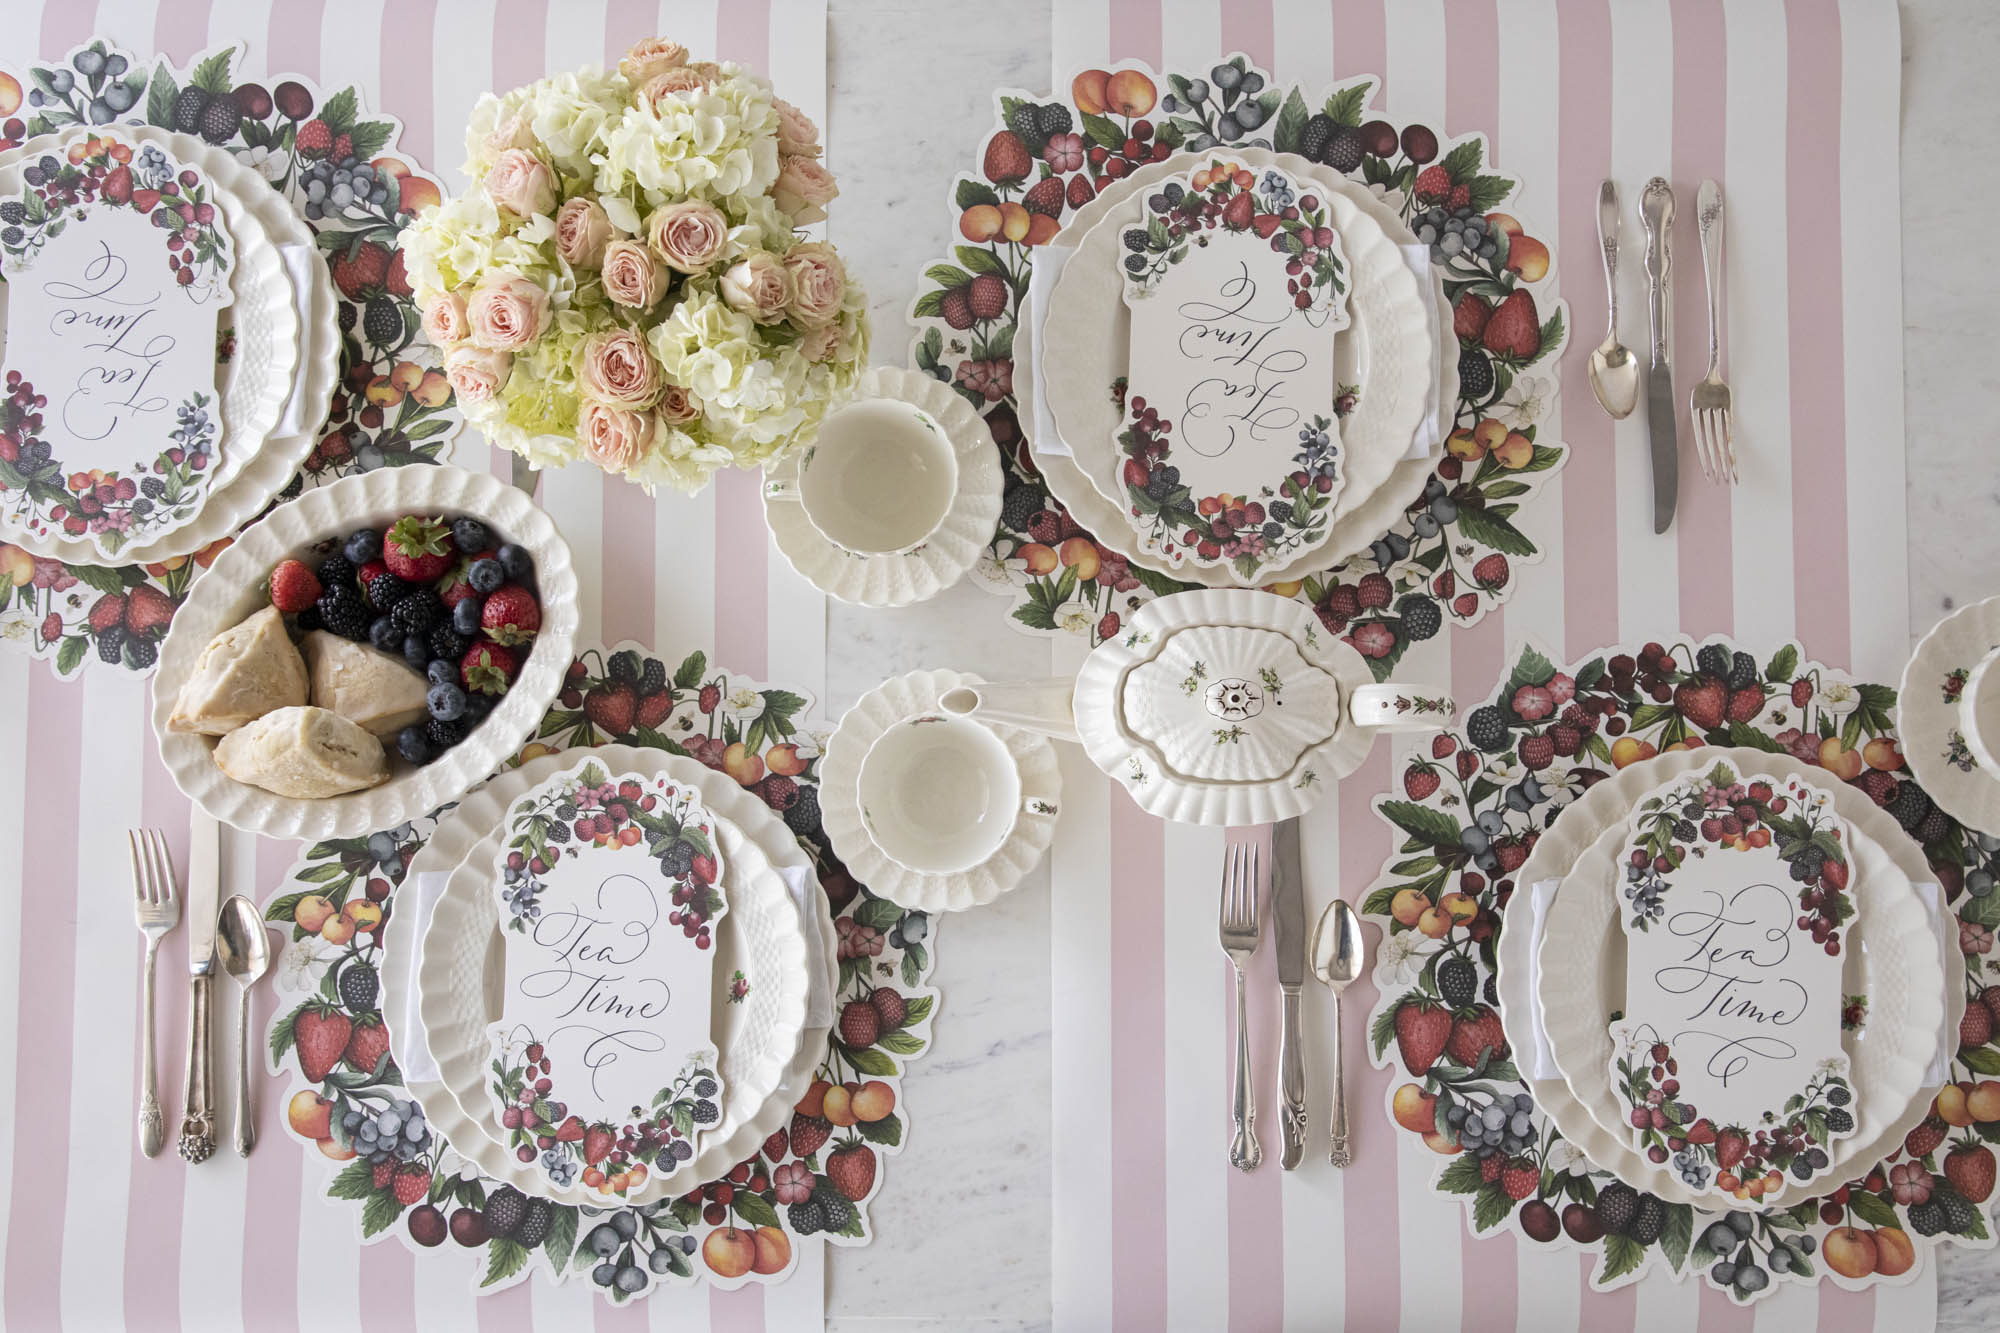 Top-down view of an elegant summertime table setting for four featuring Berry Bramble Table Cards resting on each plate.